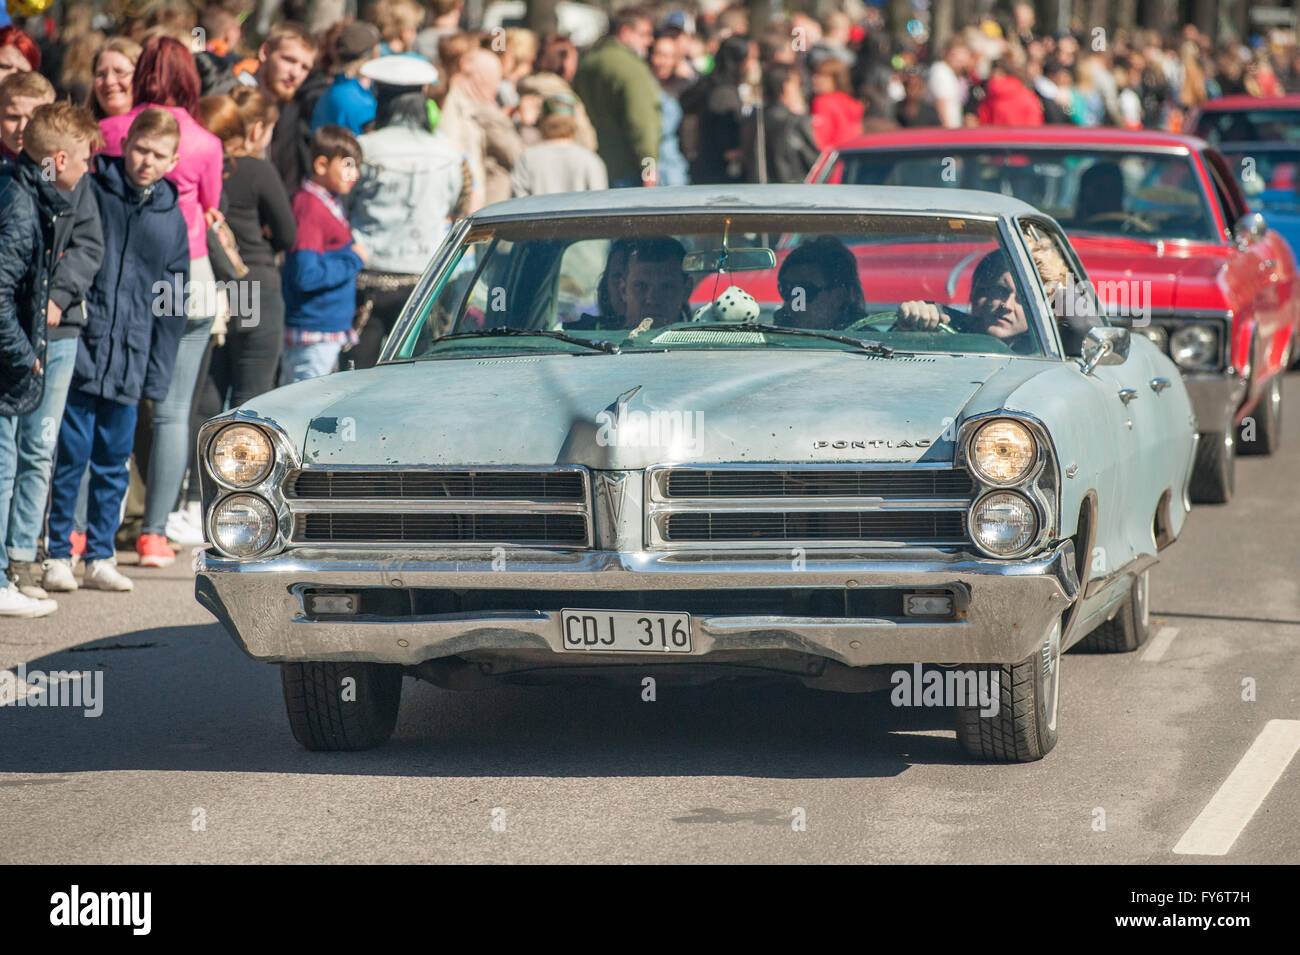 Traditional vintage car parade celebrates spring on May Day in Norrkoping, Sweden. Stock Photo